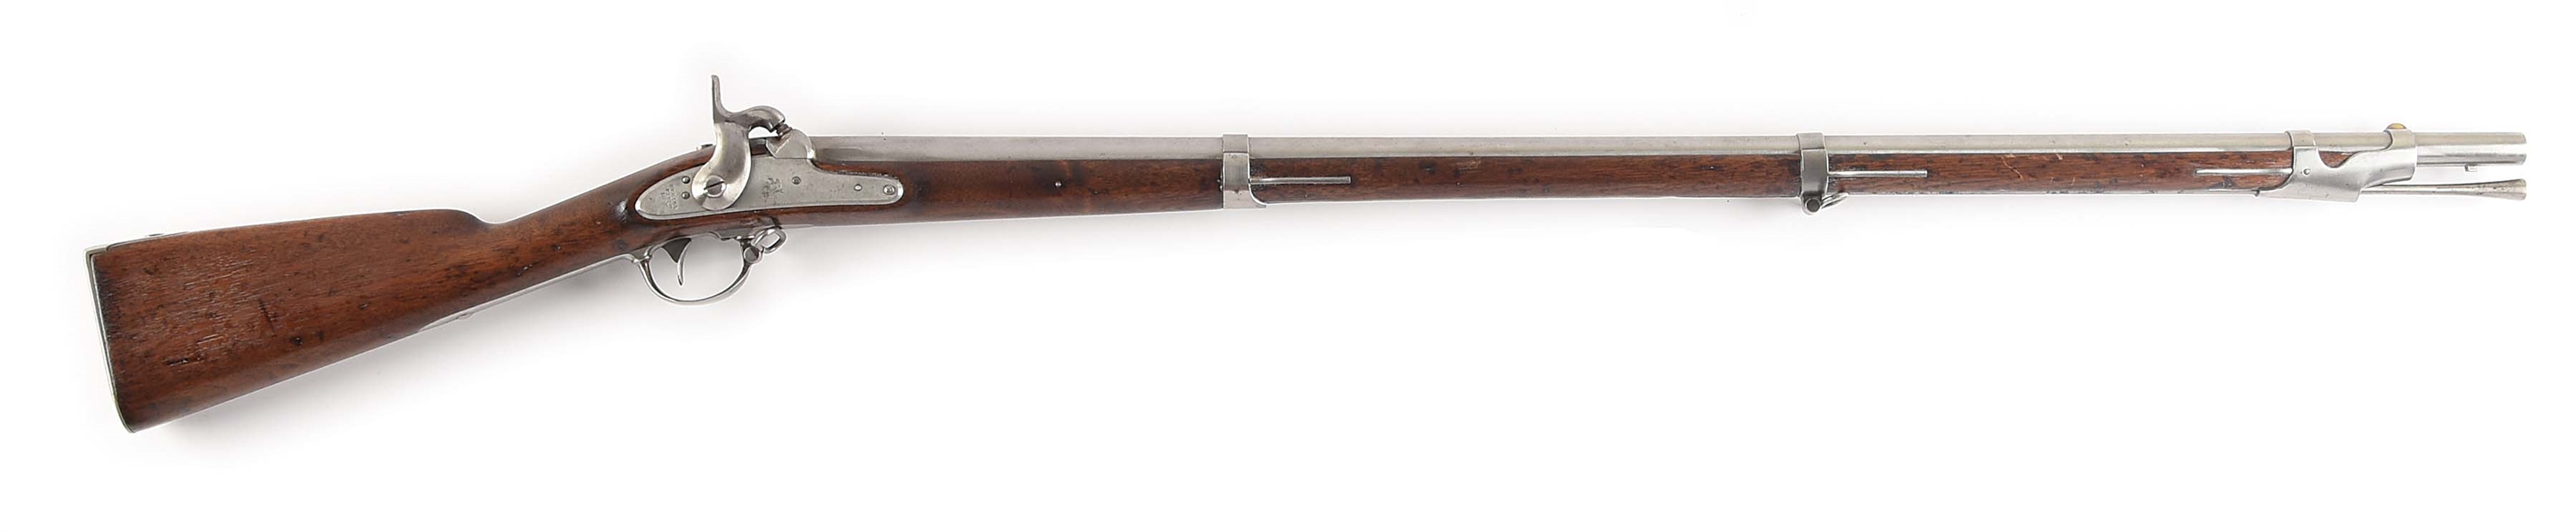 (A) U.S. SPRINGFIELD MODEL 1842 PERCUSSION MUSKET DATED 1852.